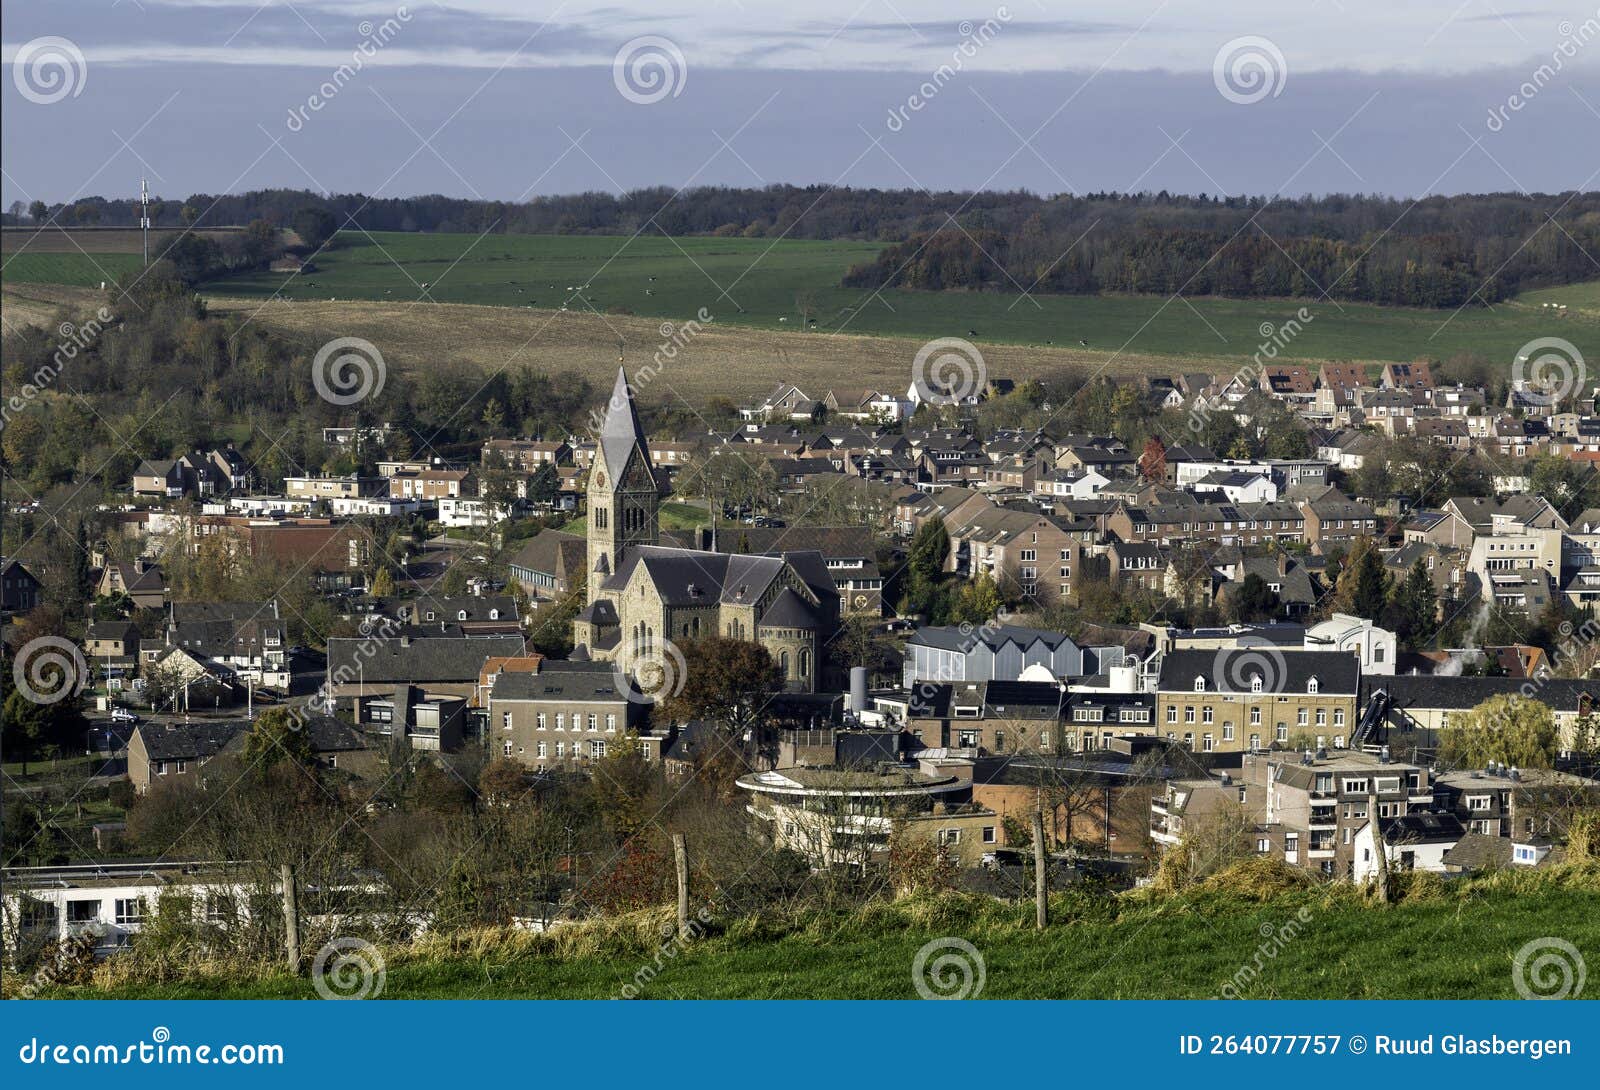 gulpen, south limburg, beautiful village to go hiking in all seasons of the year.